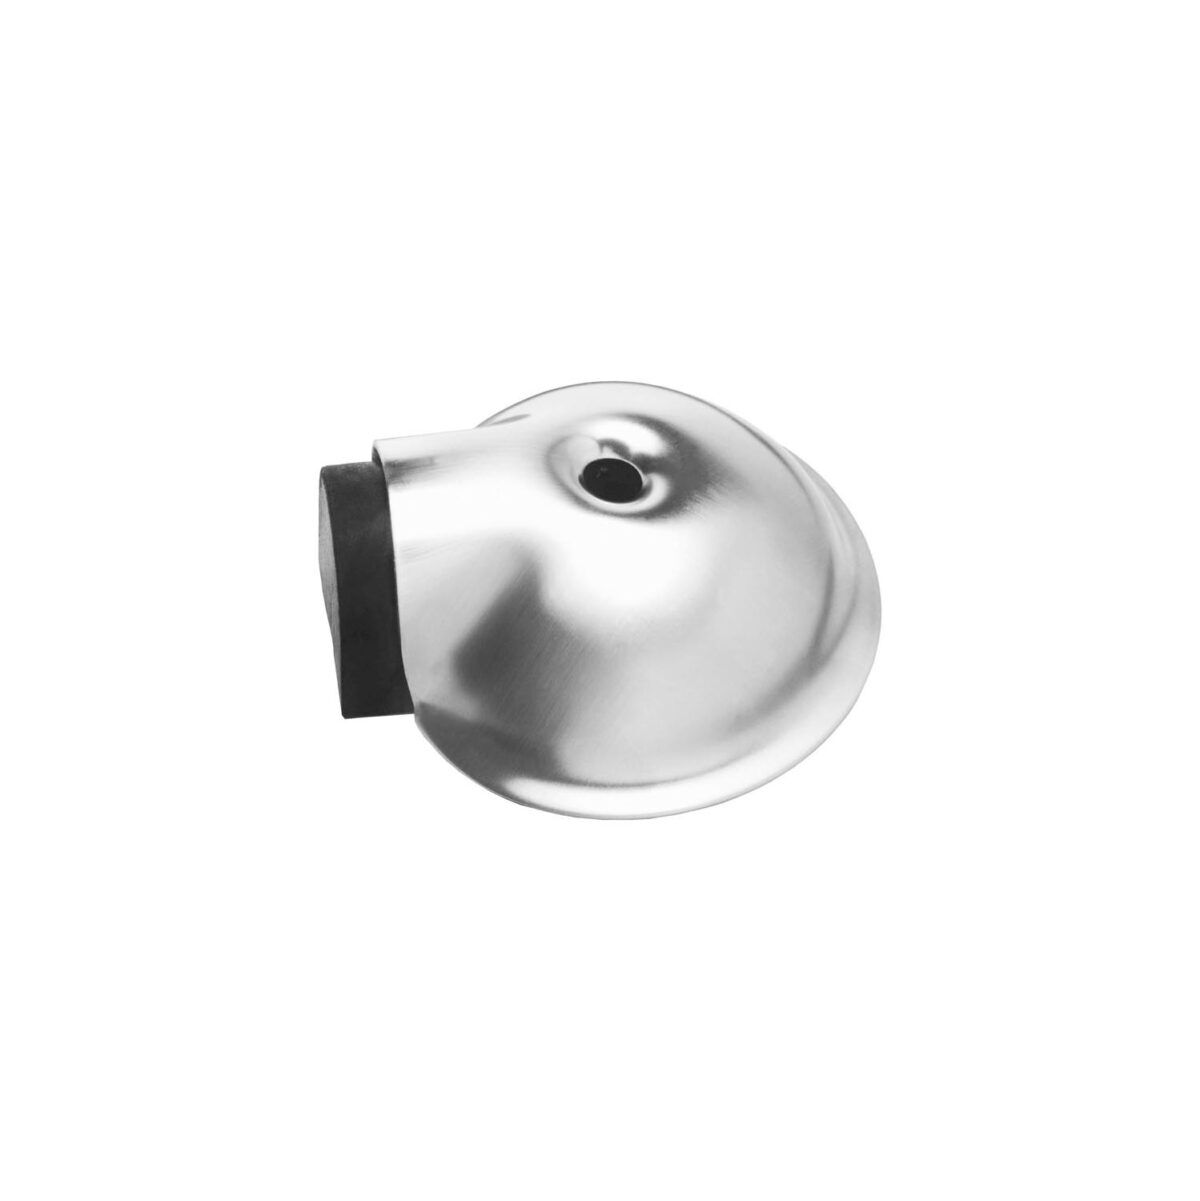 Intersteel Door stop ball o65mm with brushed stainless steel cams